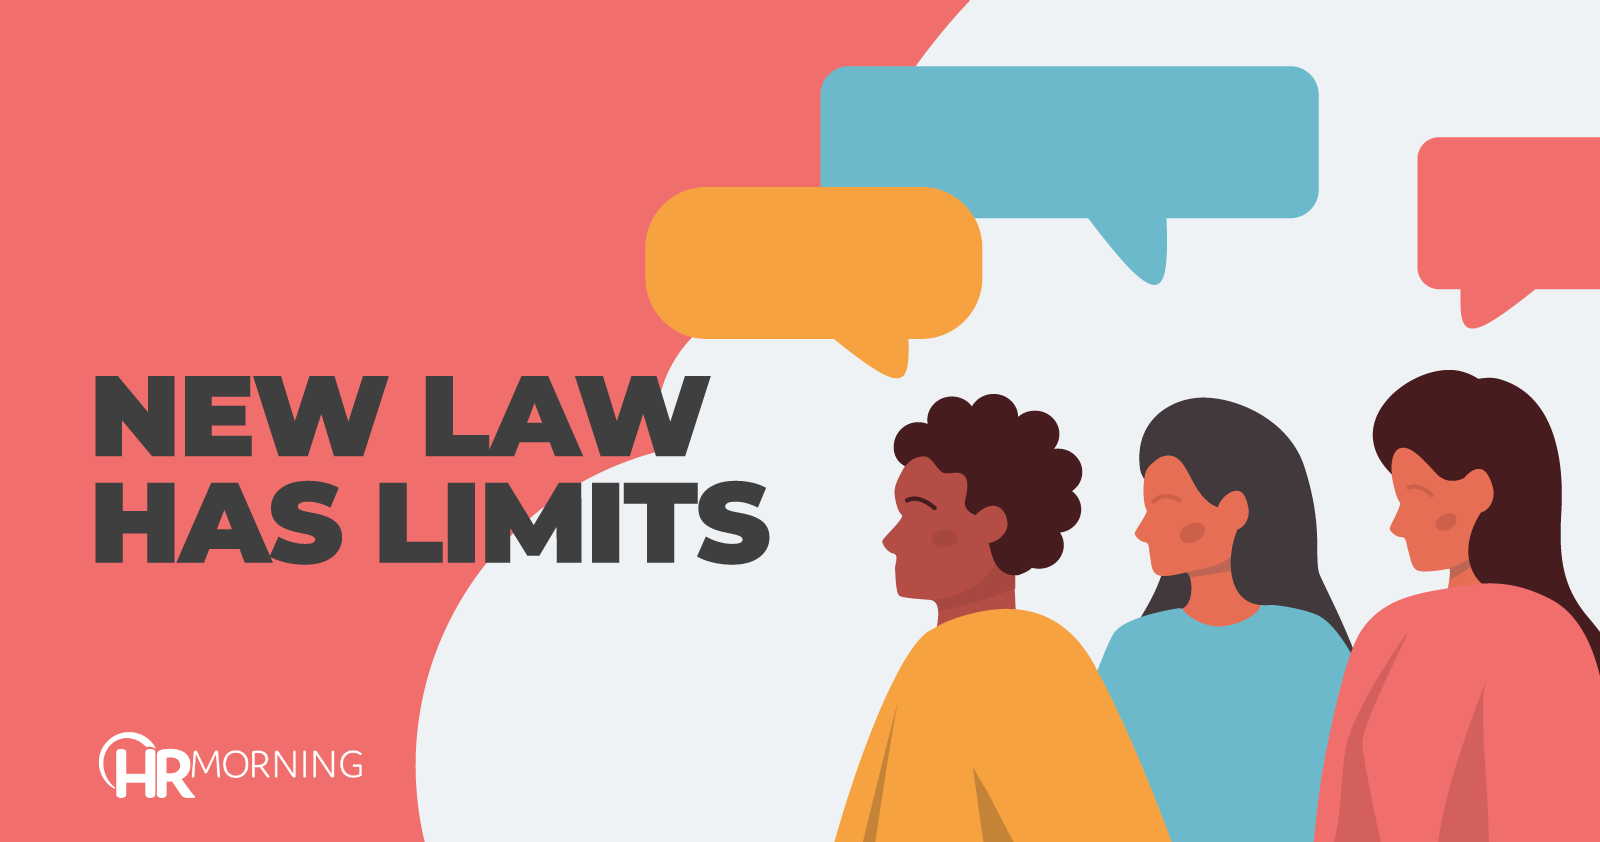 New Law Has Limits